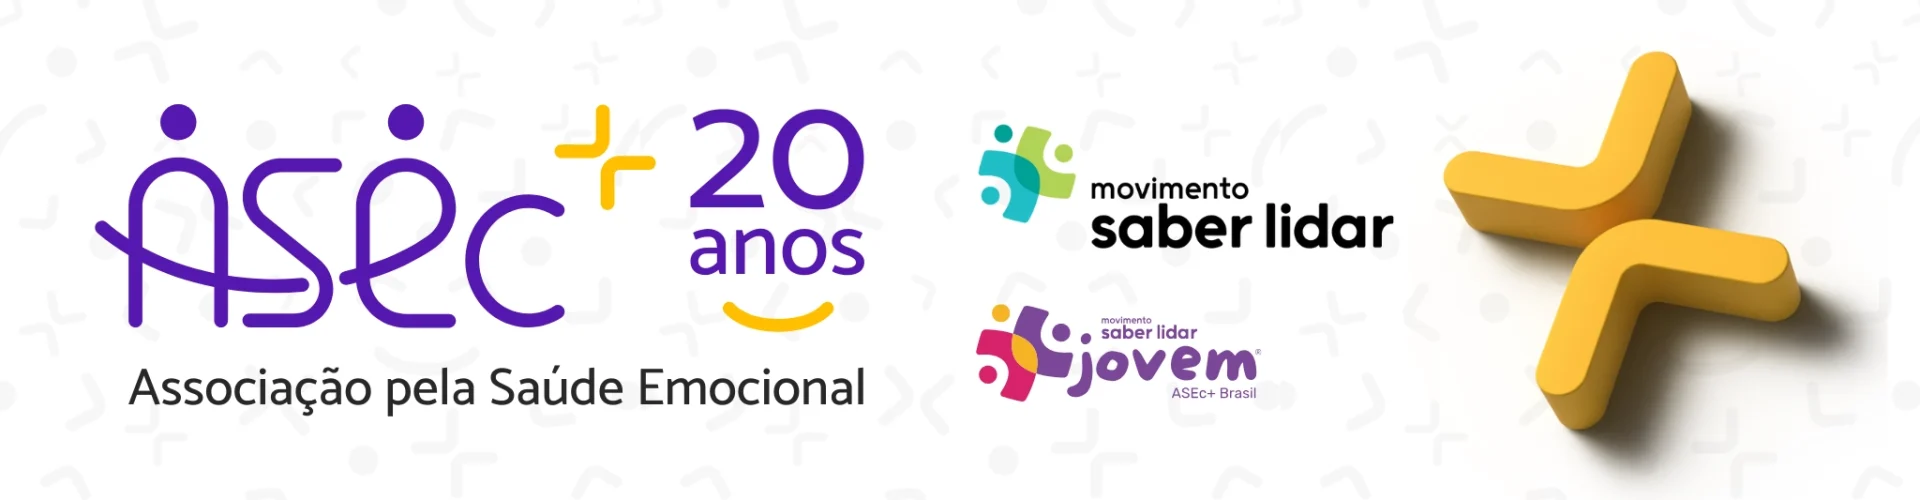 asec+ 20 anos site banner